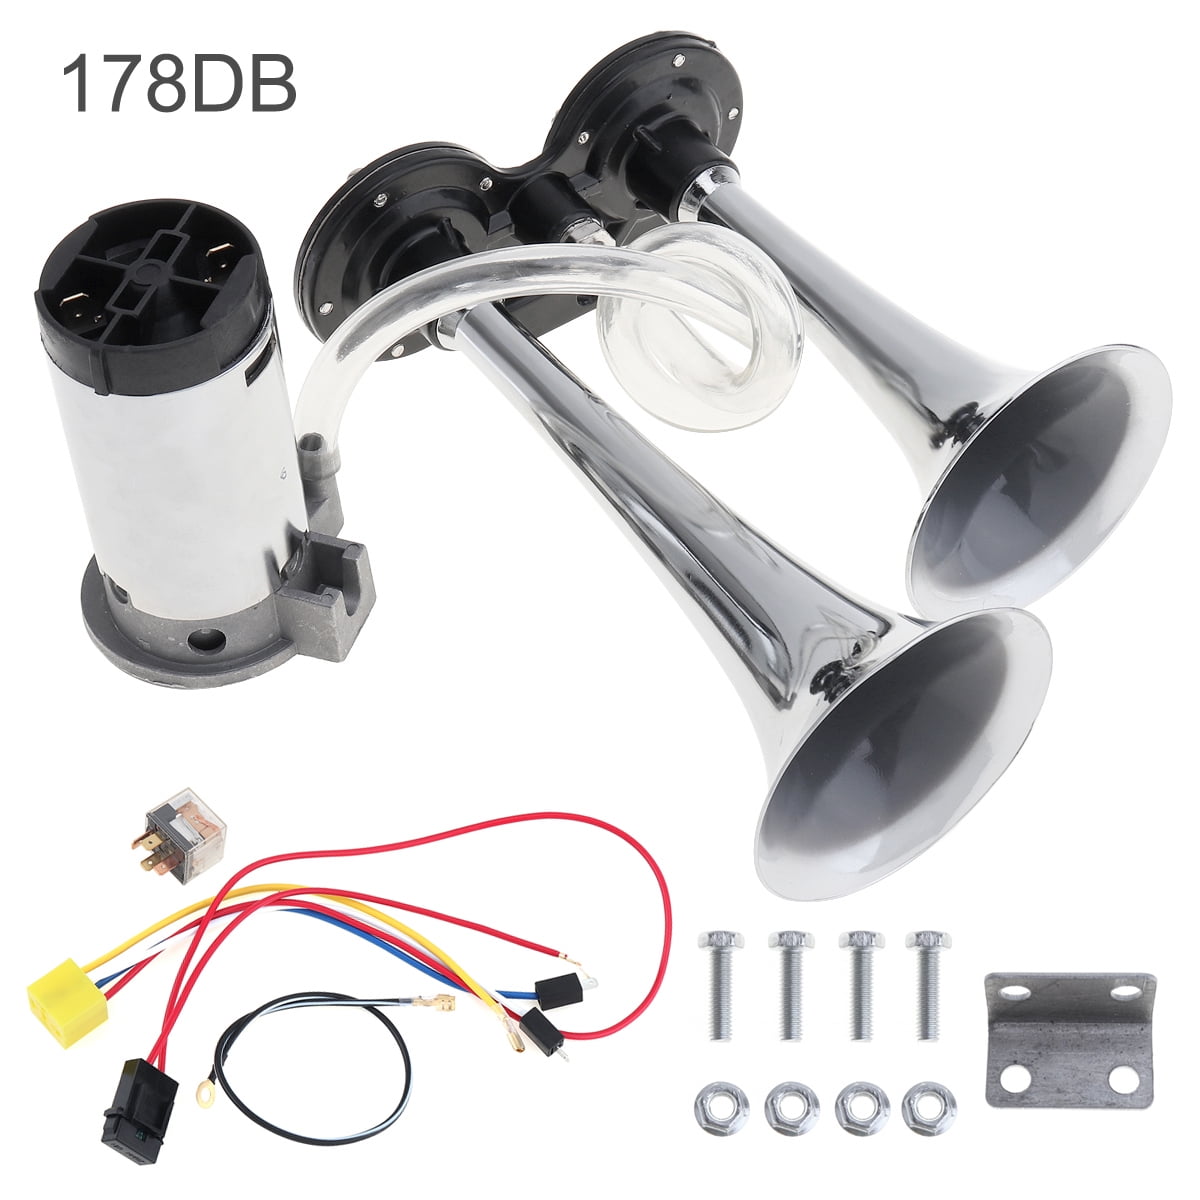 12v Air Horn 178db Loud Sound Dual Trumpet With Air Compressor For Car  Motorcycle Boat Truck